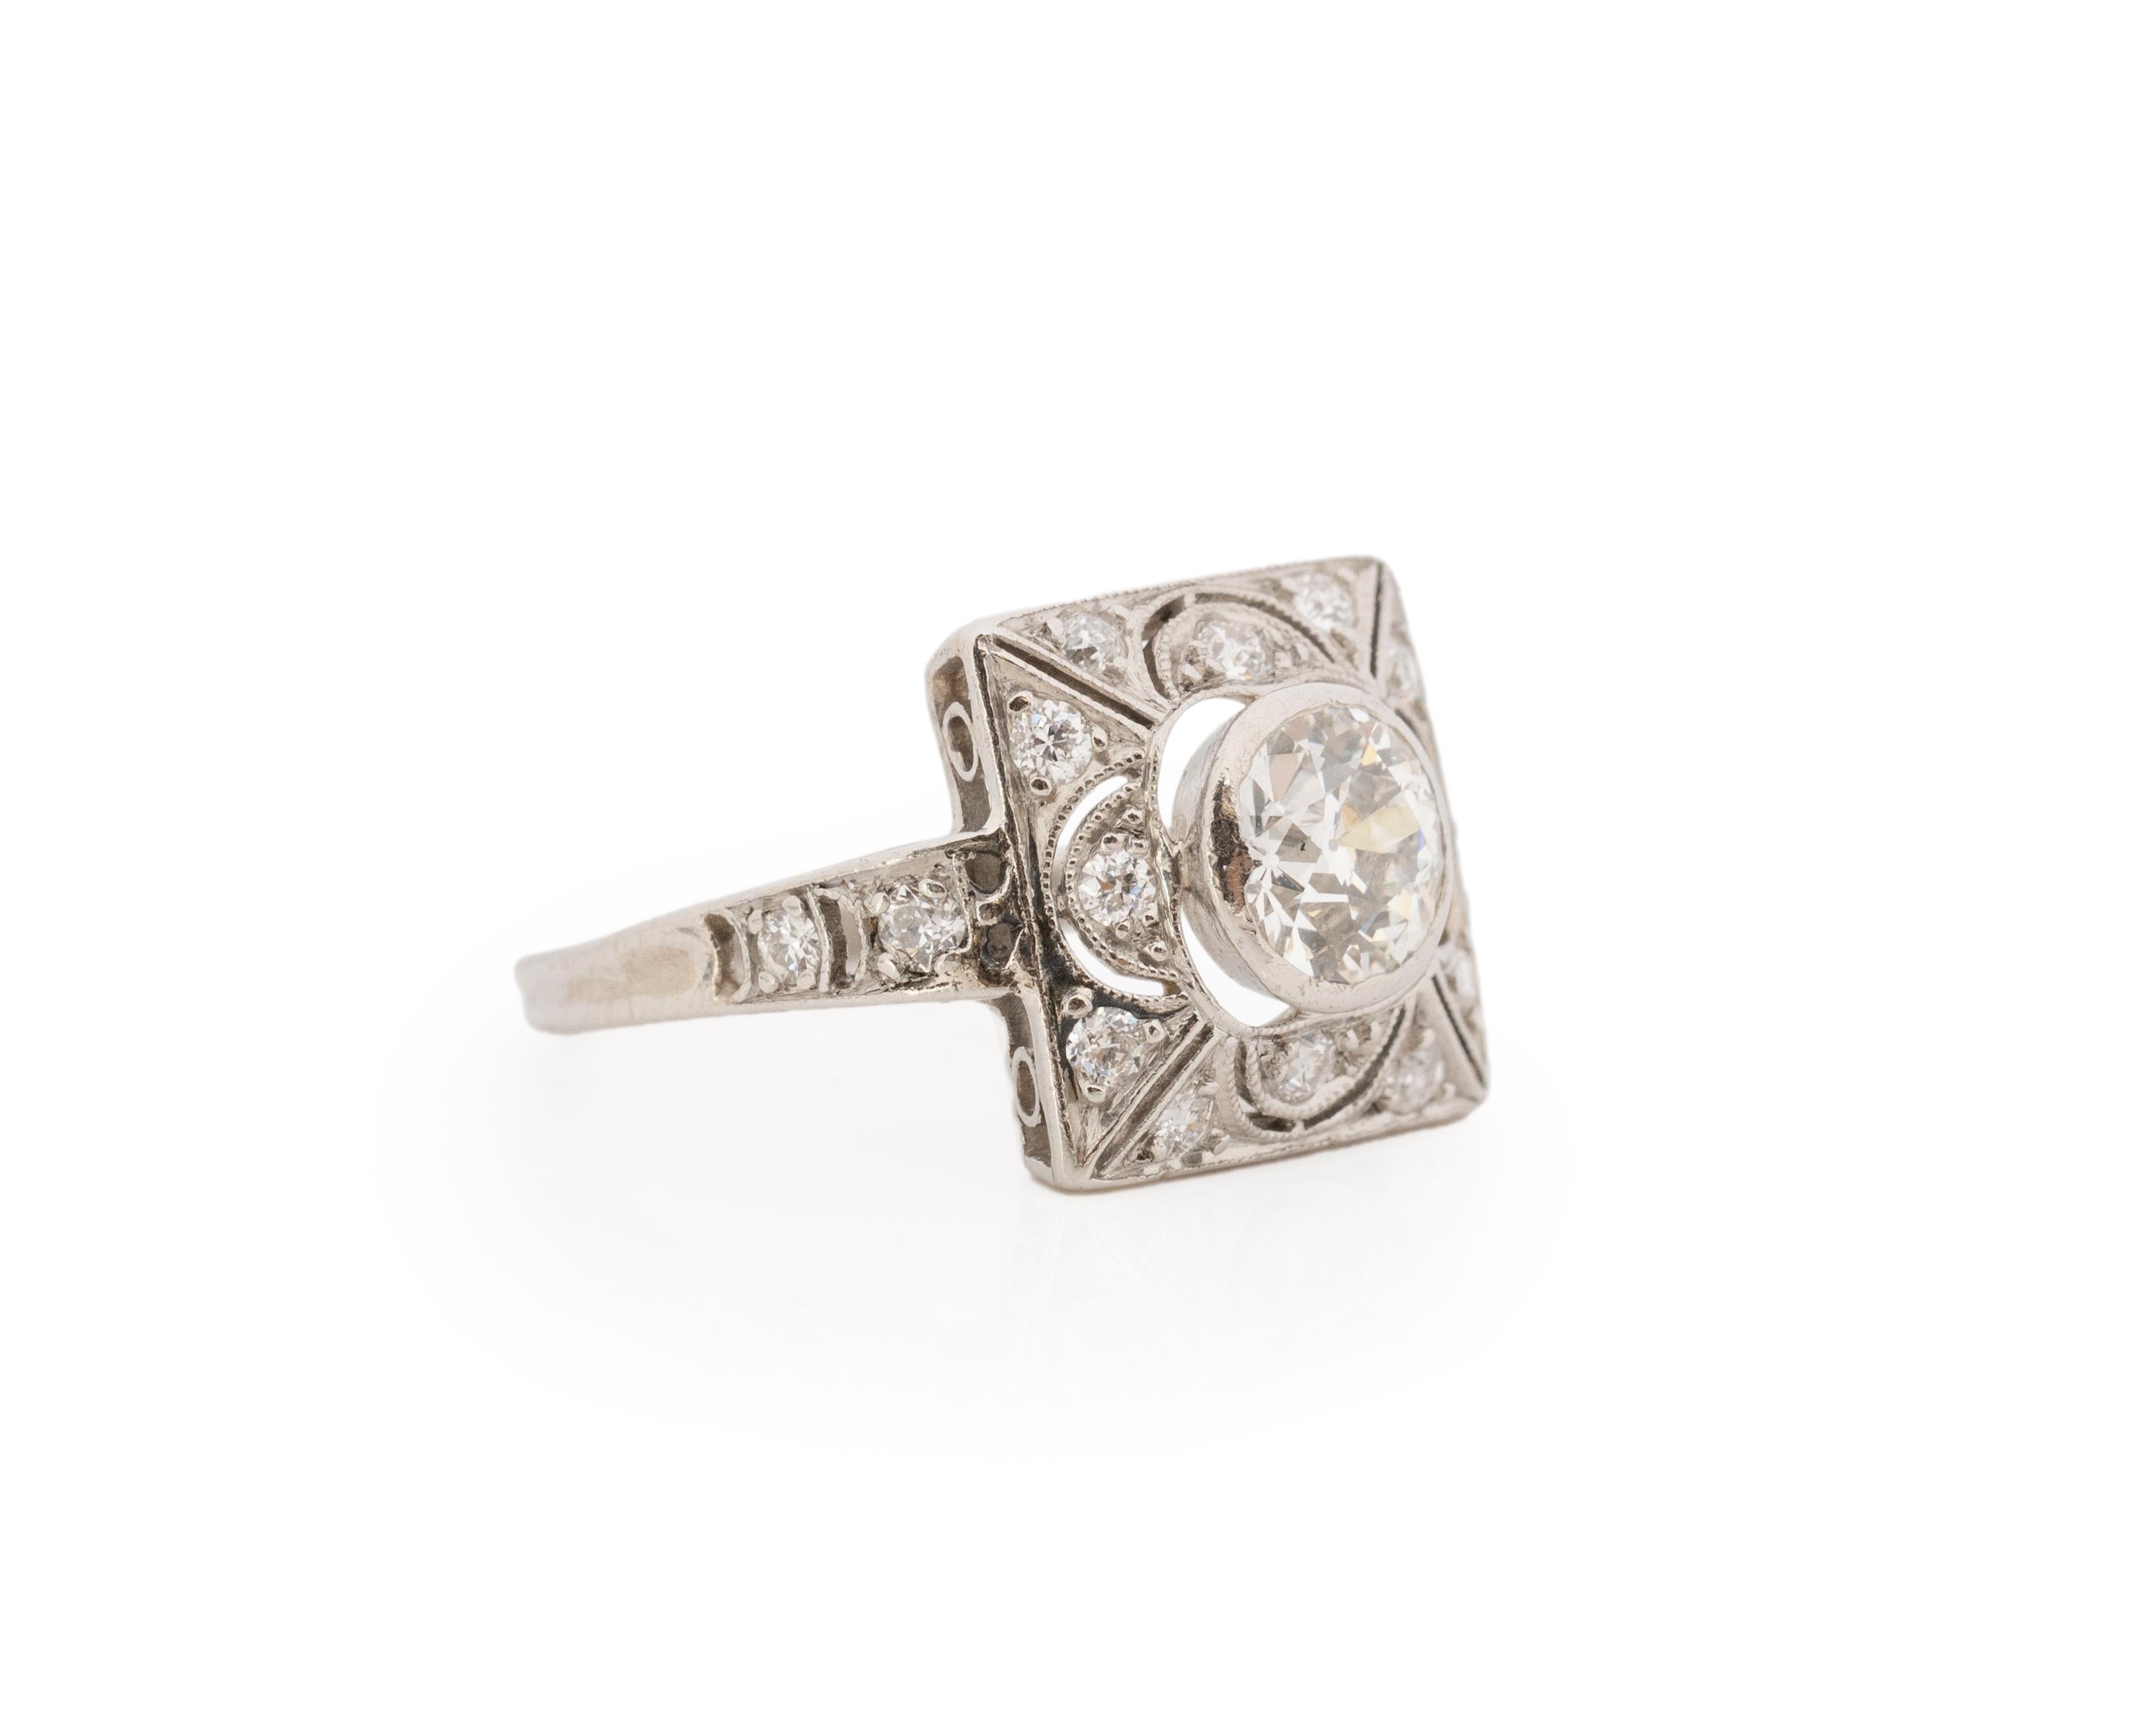 Maker: Tiffany & Co (Hallmark engraved on inner shank)
Ring Size: 5
Metal Type: Platinum [Hallmarked, and Tested]
Weight: 3.5 grams

Center Diamond Details:
Weight: .85ct
Cut: Antique Cushion
Color: F
Clarity: VS

Side Diamond Details:
Weight: